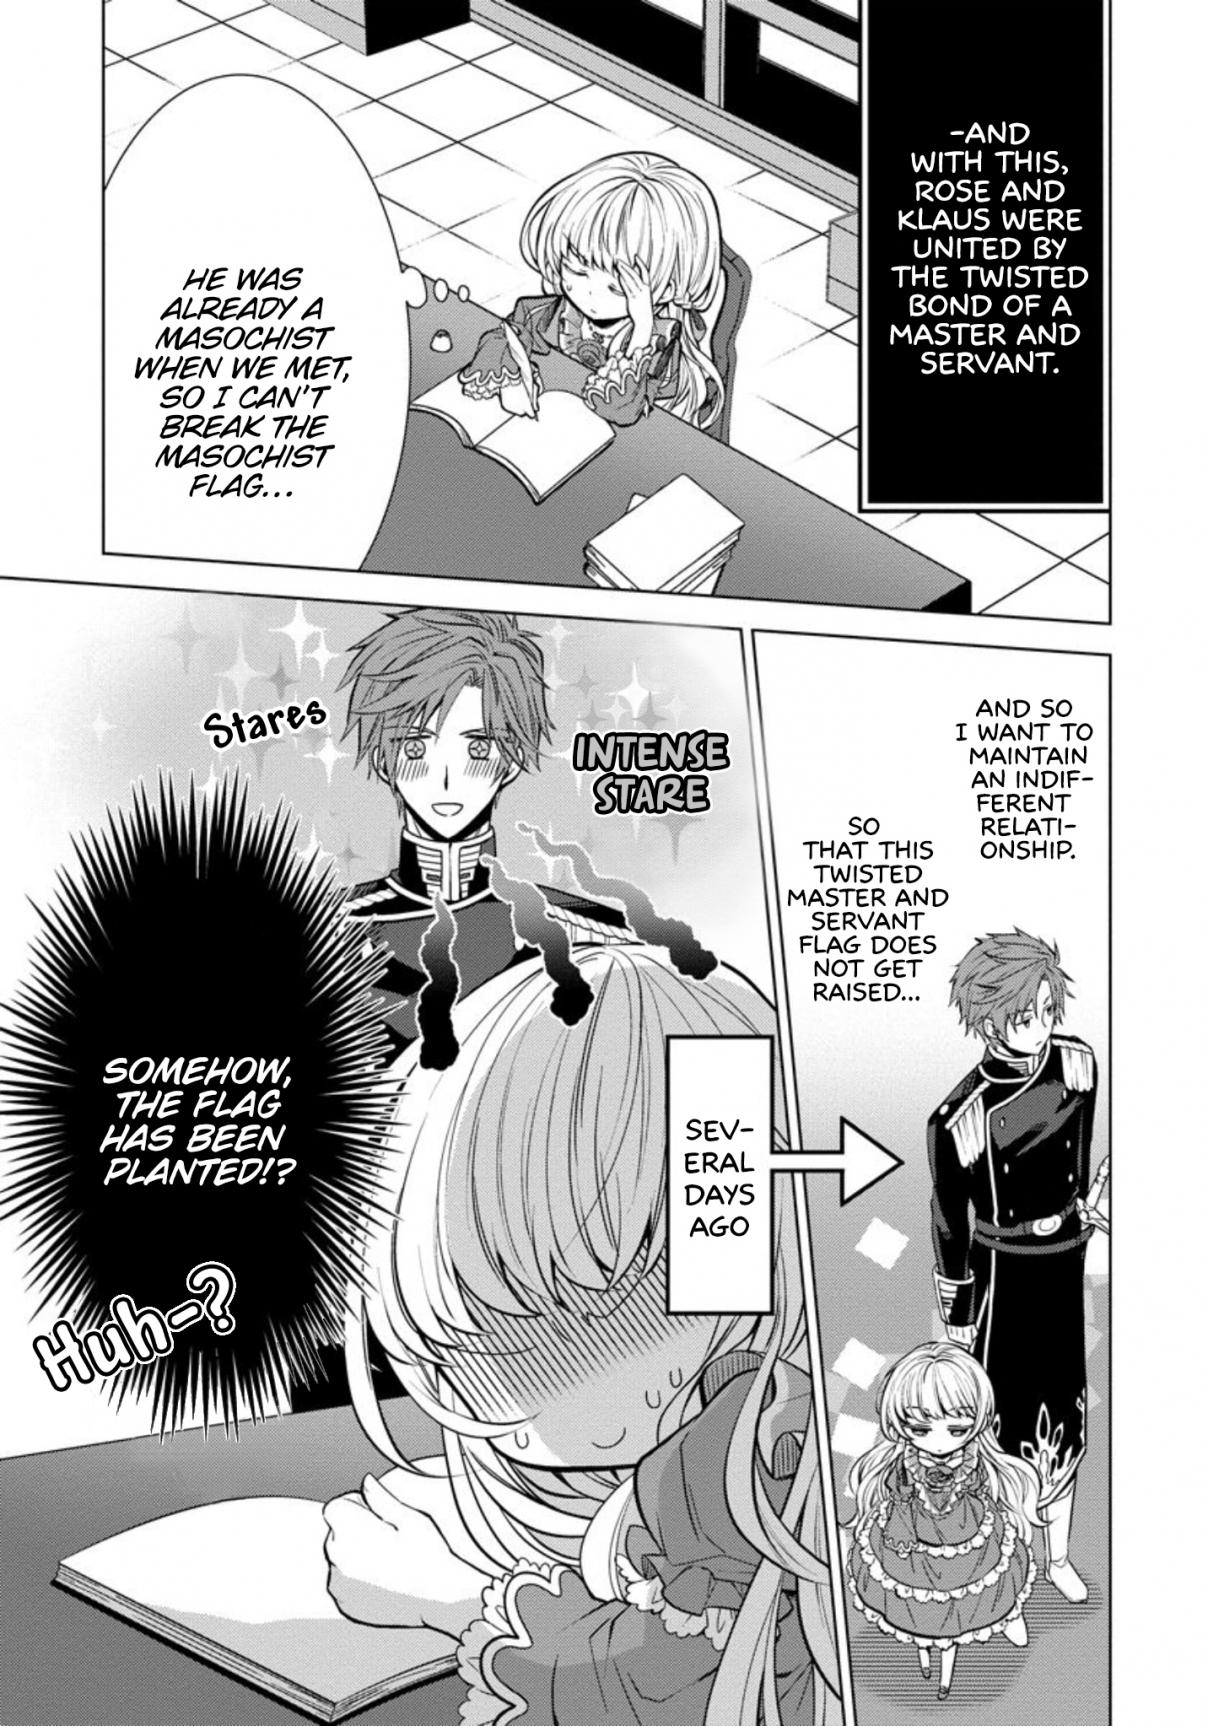 The Reincarnated Princess Strikes Down Flags Today as Well Vol. 1 Ch. 3